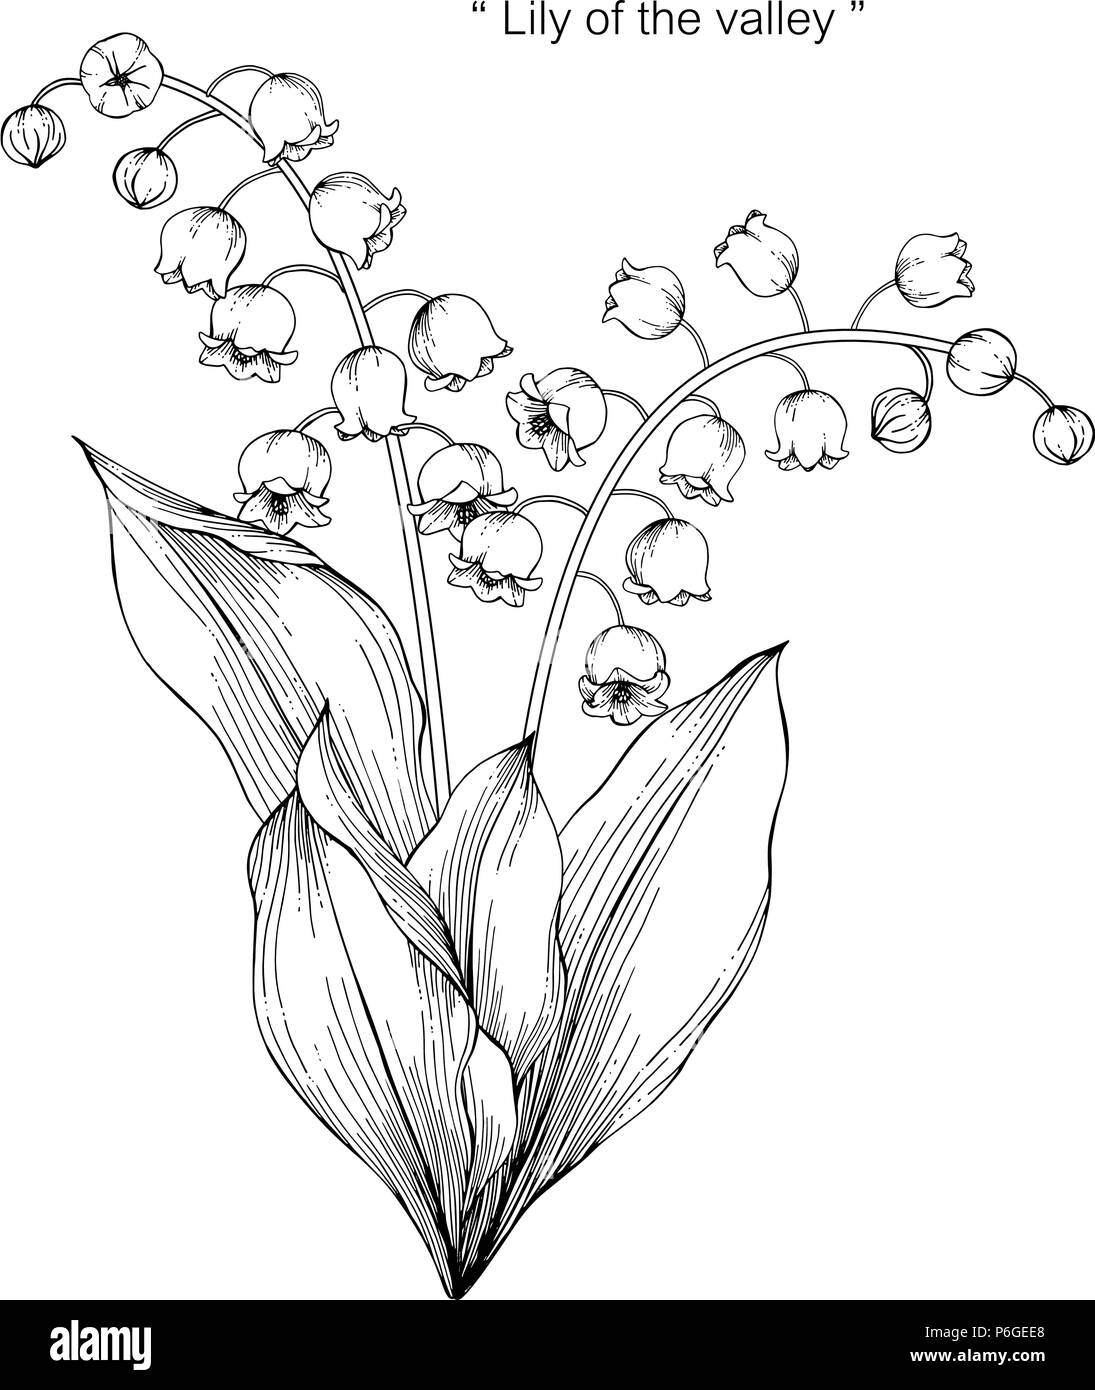 Lily of the valley flower drawing illustration. Black and white with ...